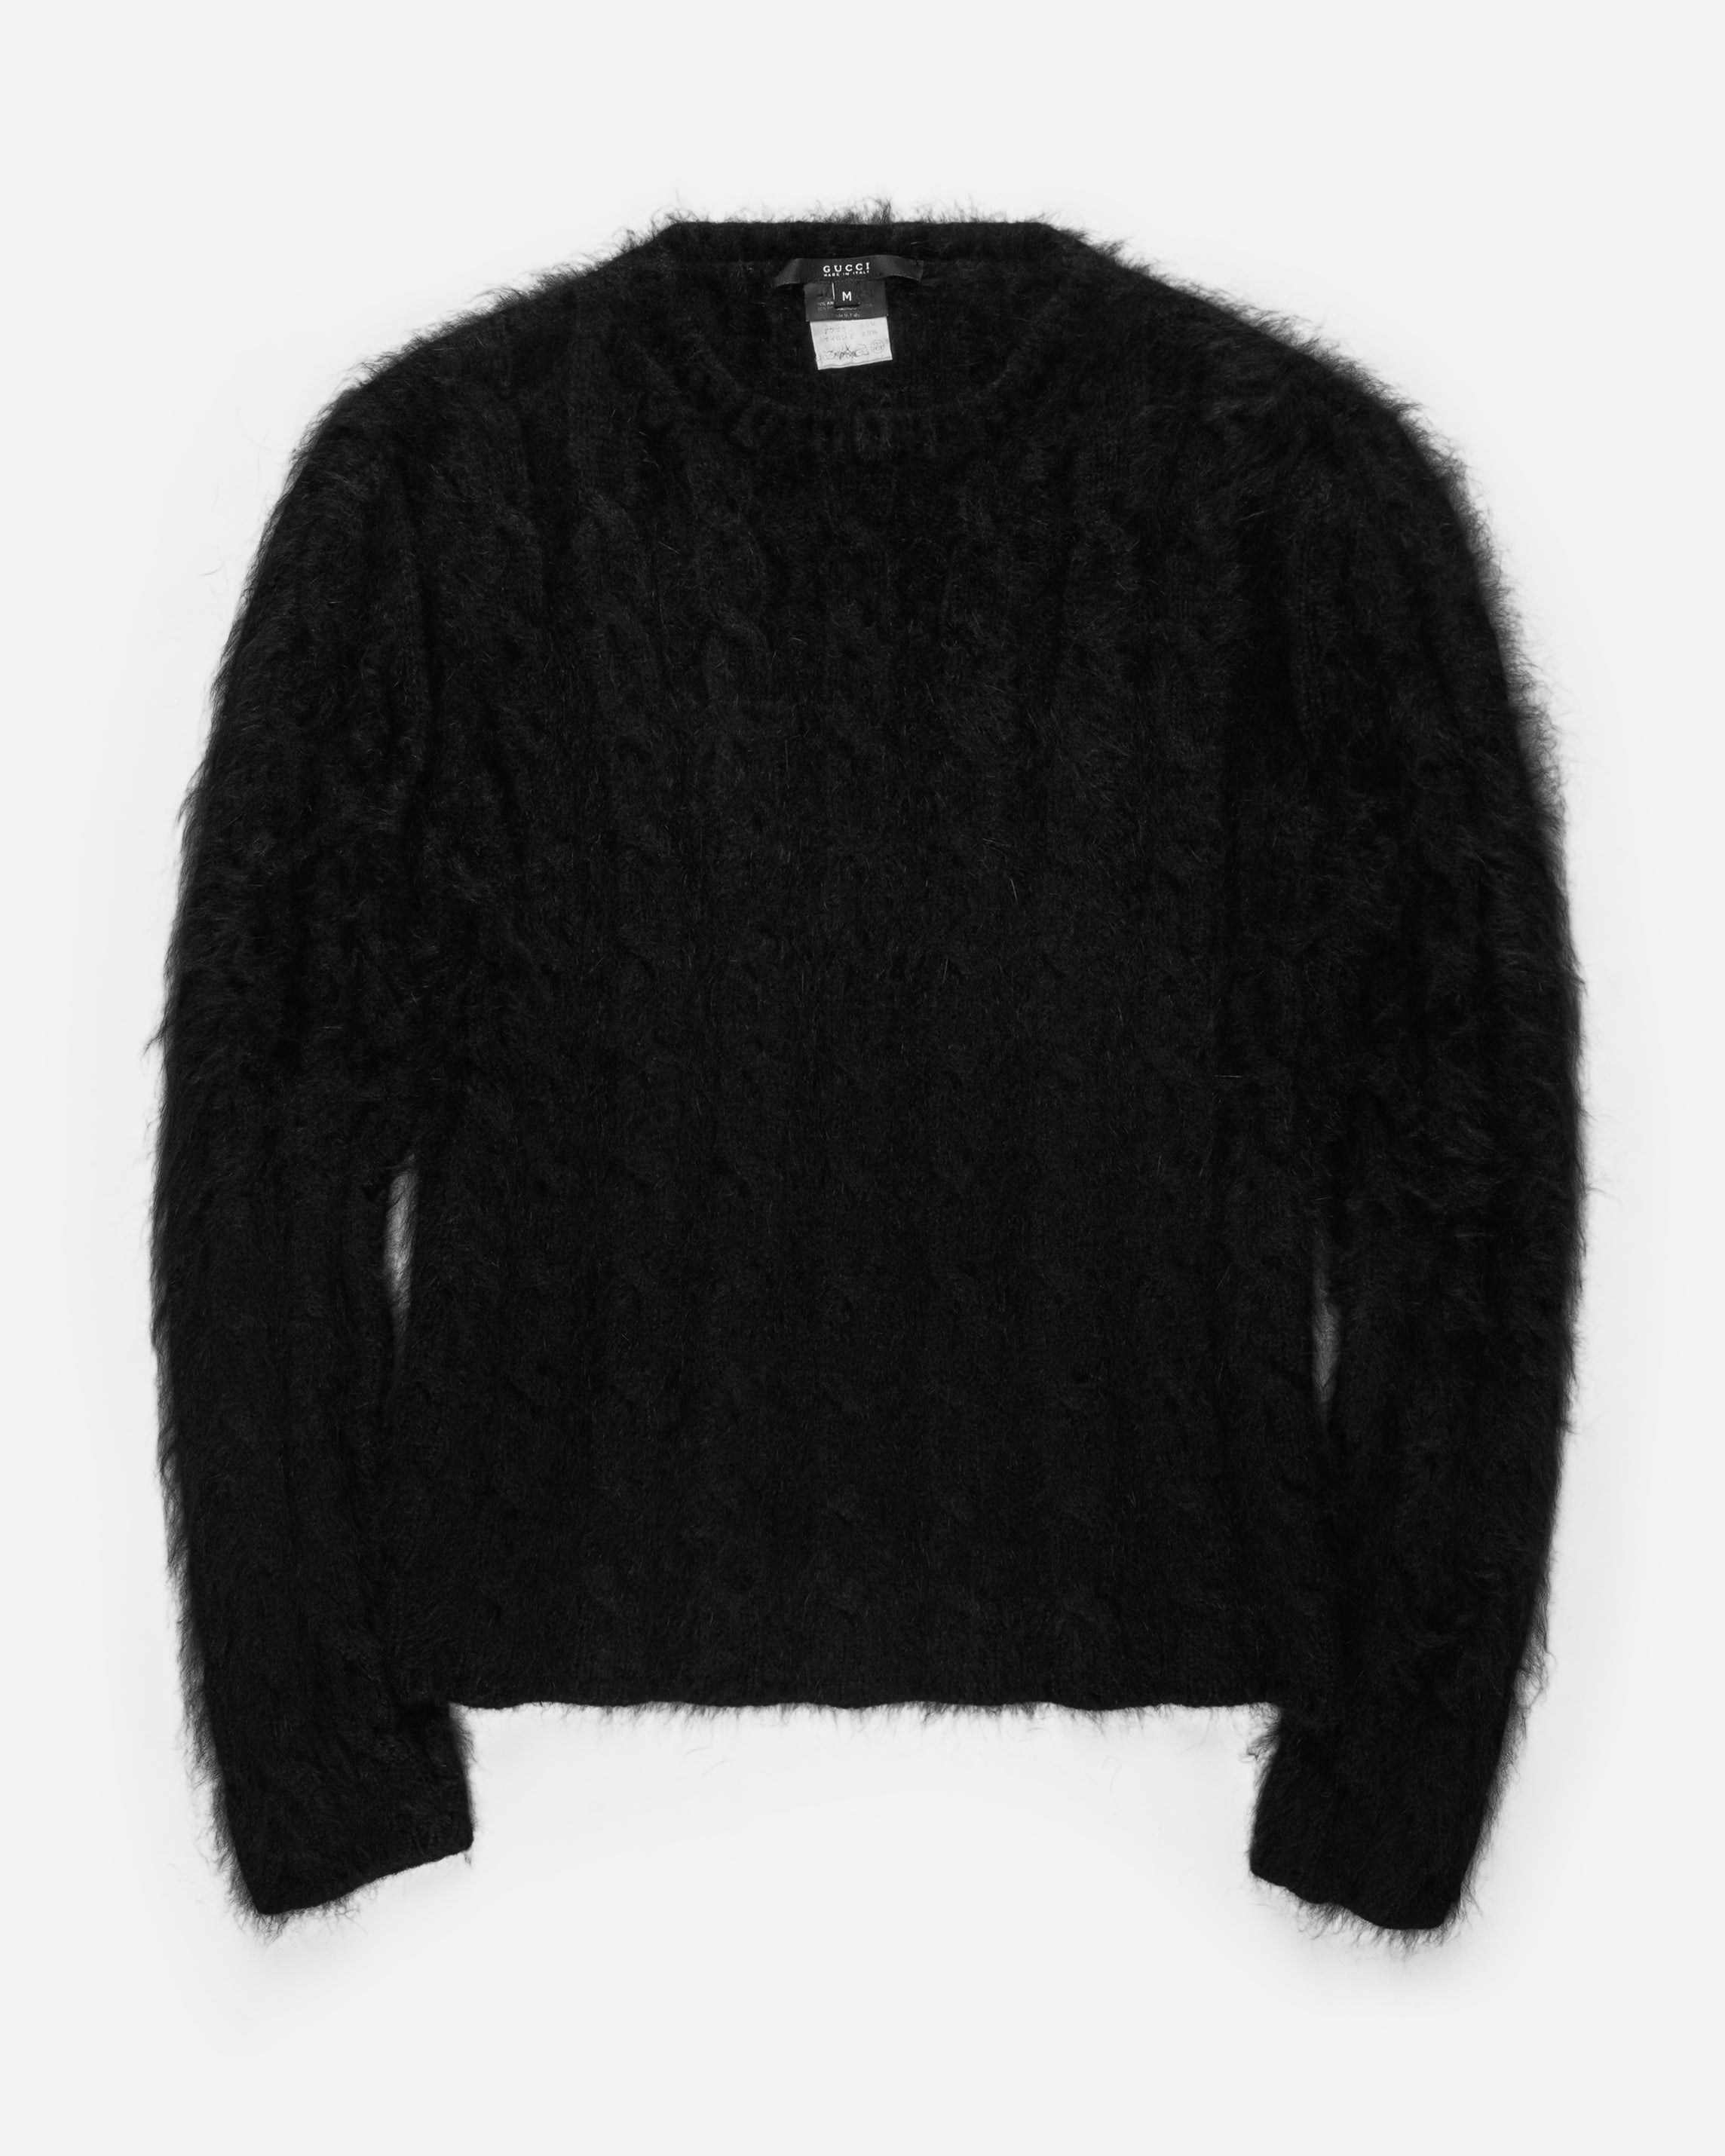 Gucci by Tom Ford Black Angora Cable Knit Sweater - SILVER LEAGUE